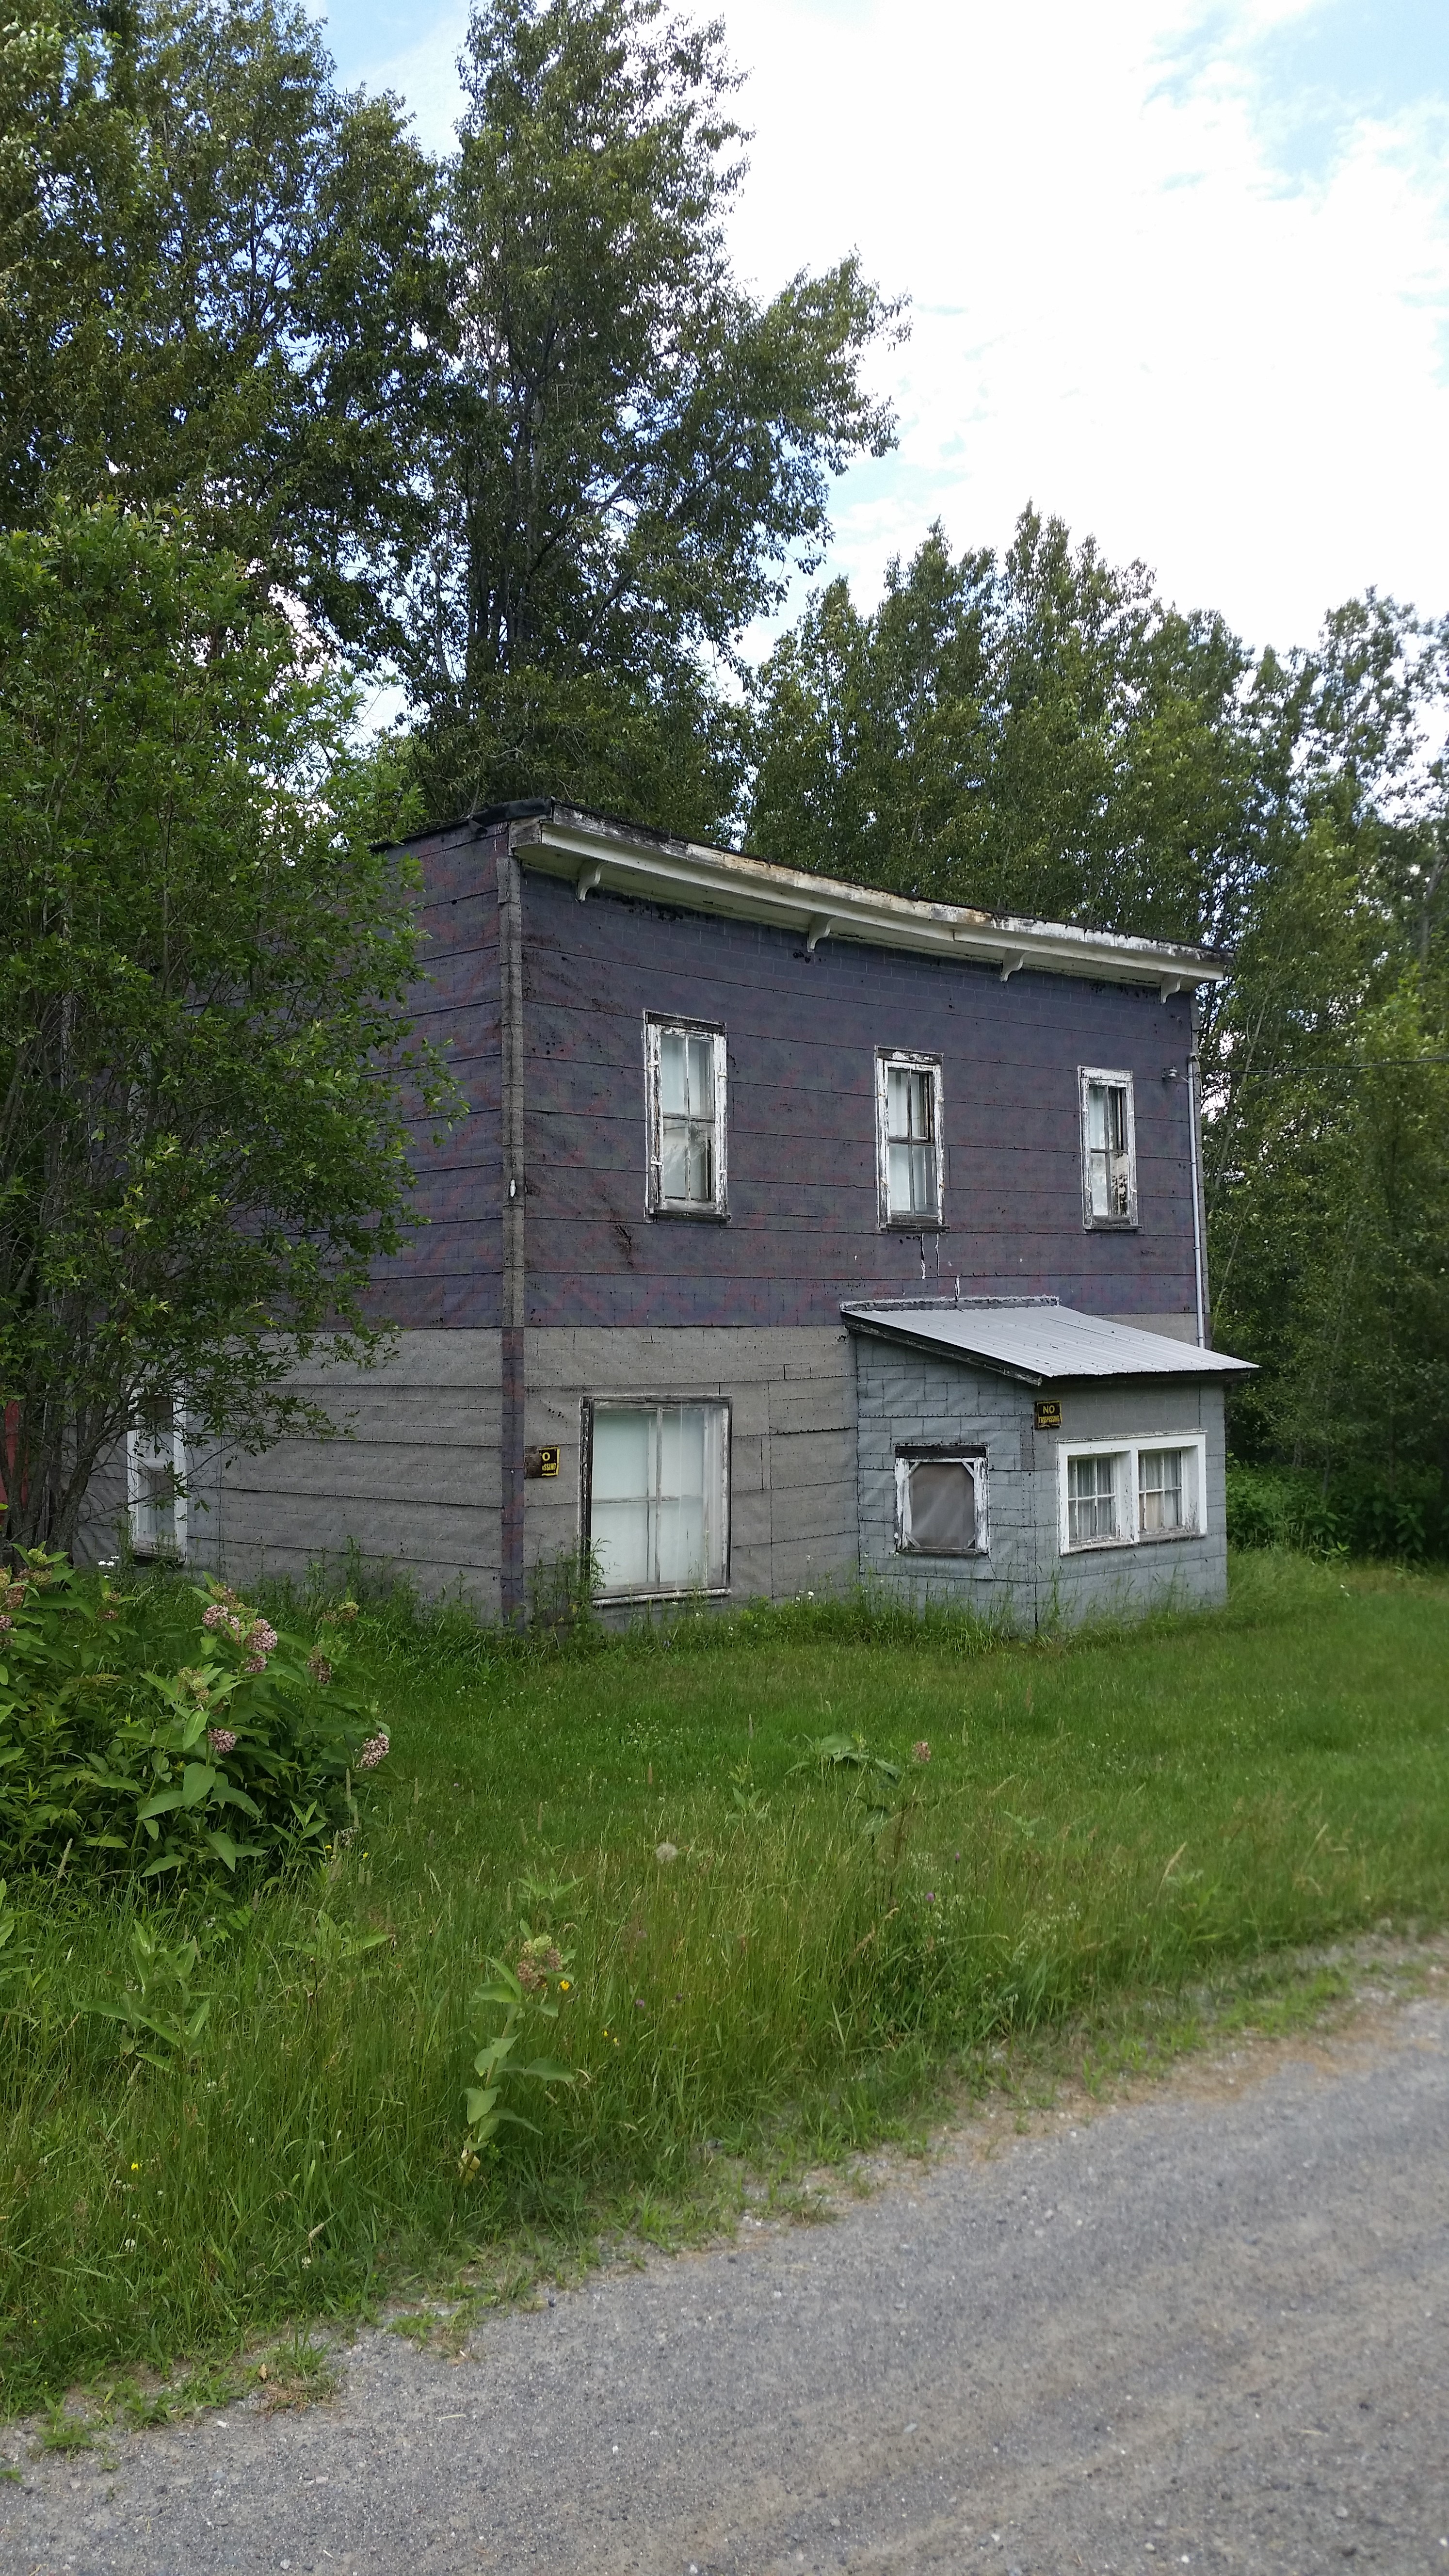 the old Desaulniers Hotel; an abandoned grey, early-1900s building with two levels and many simple windows, surrounded by grass, trees and a gravel road.